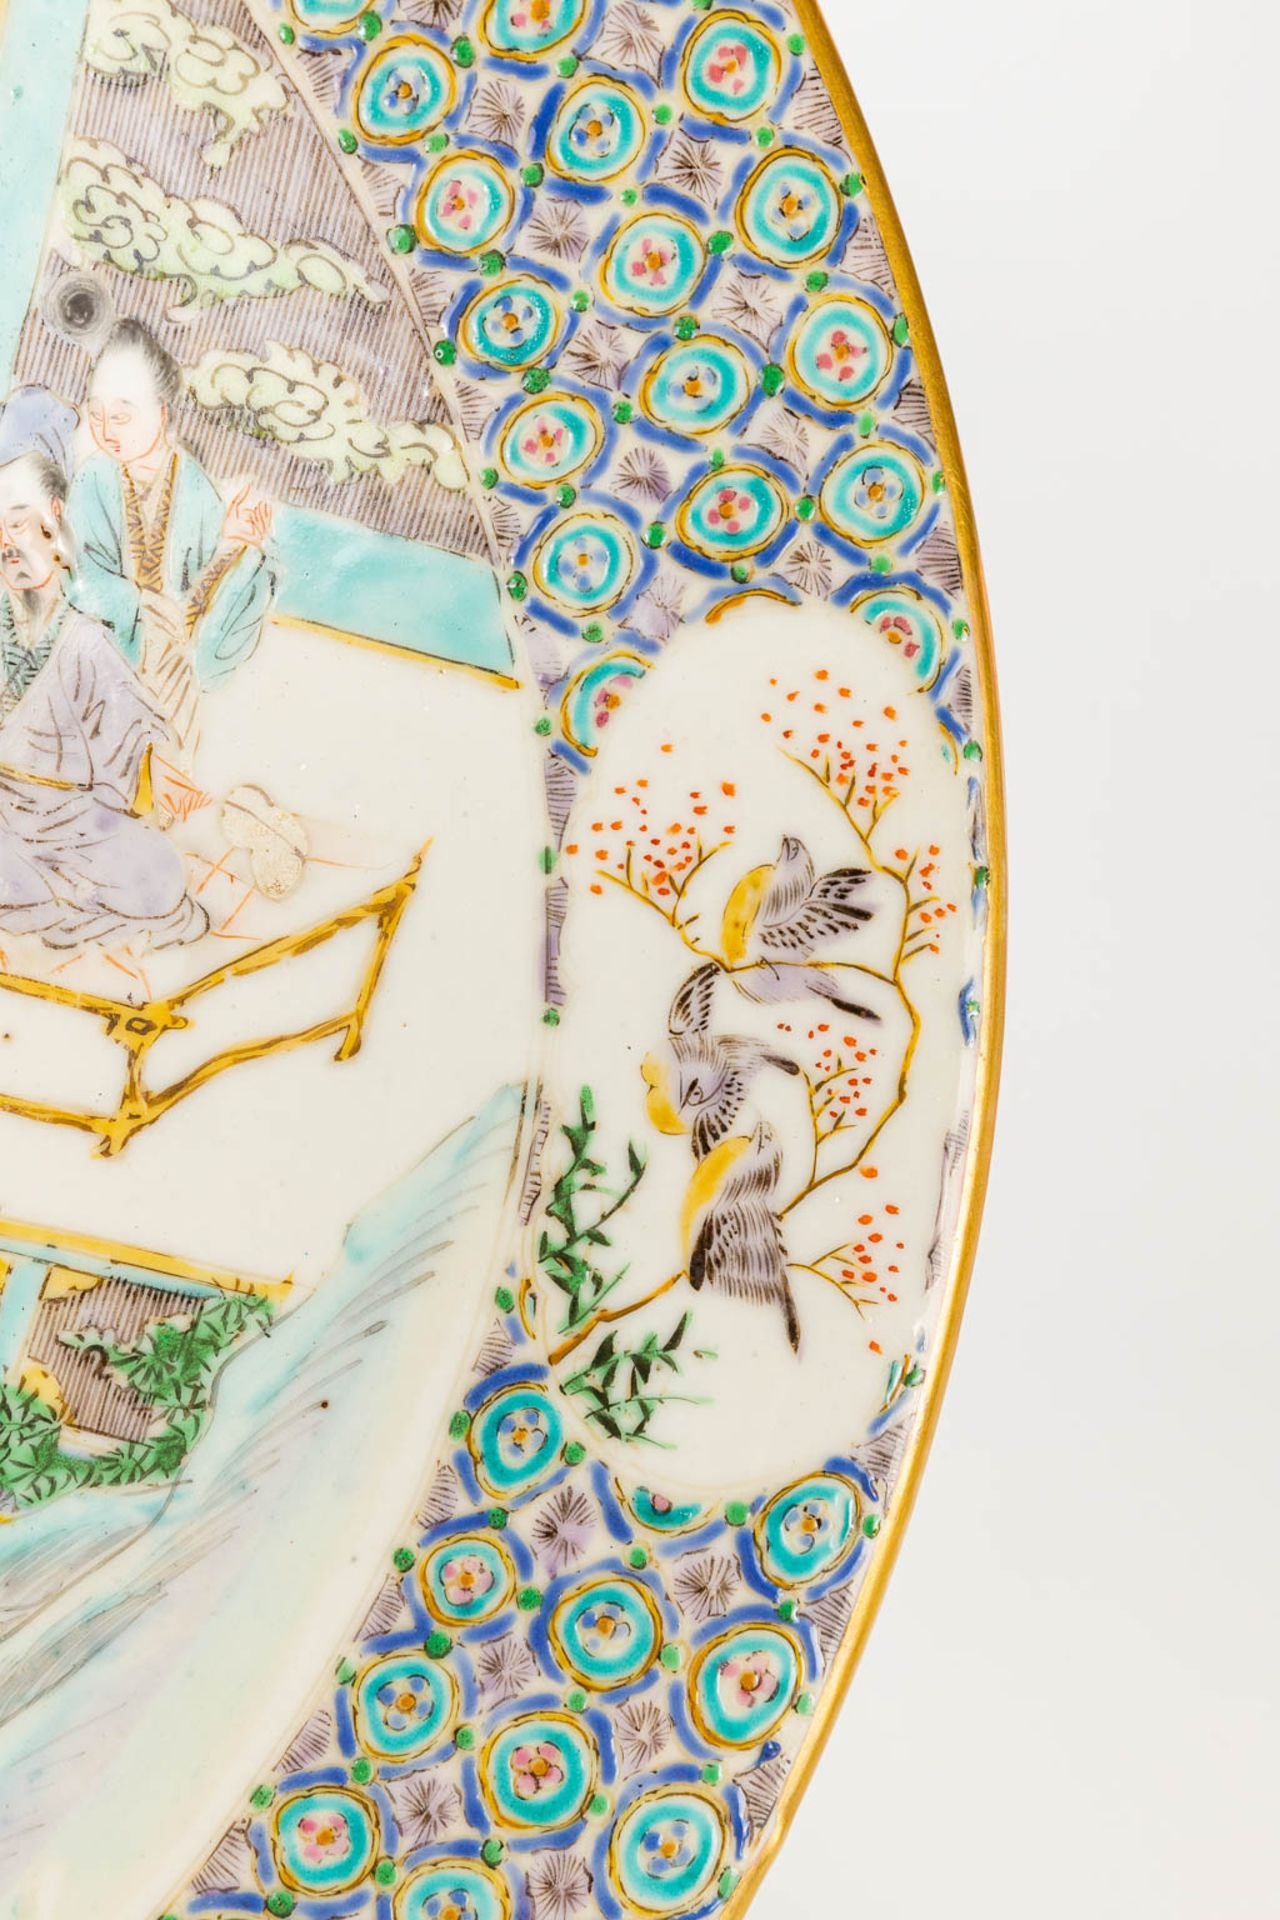 A pair of plates made of Chinese porcelain in Kanton style. 19th century. - Image 14 of 24